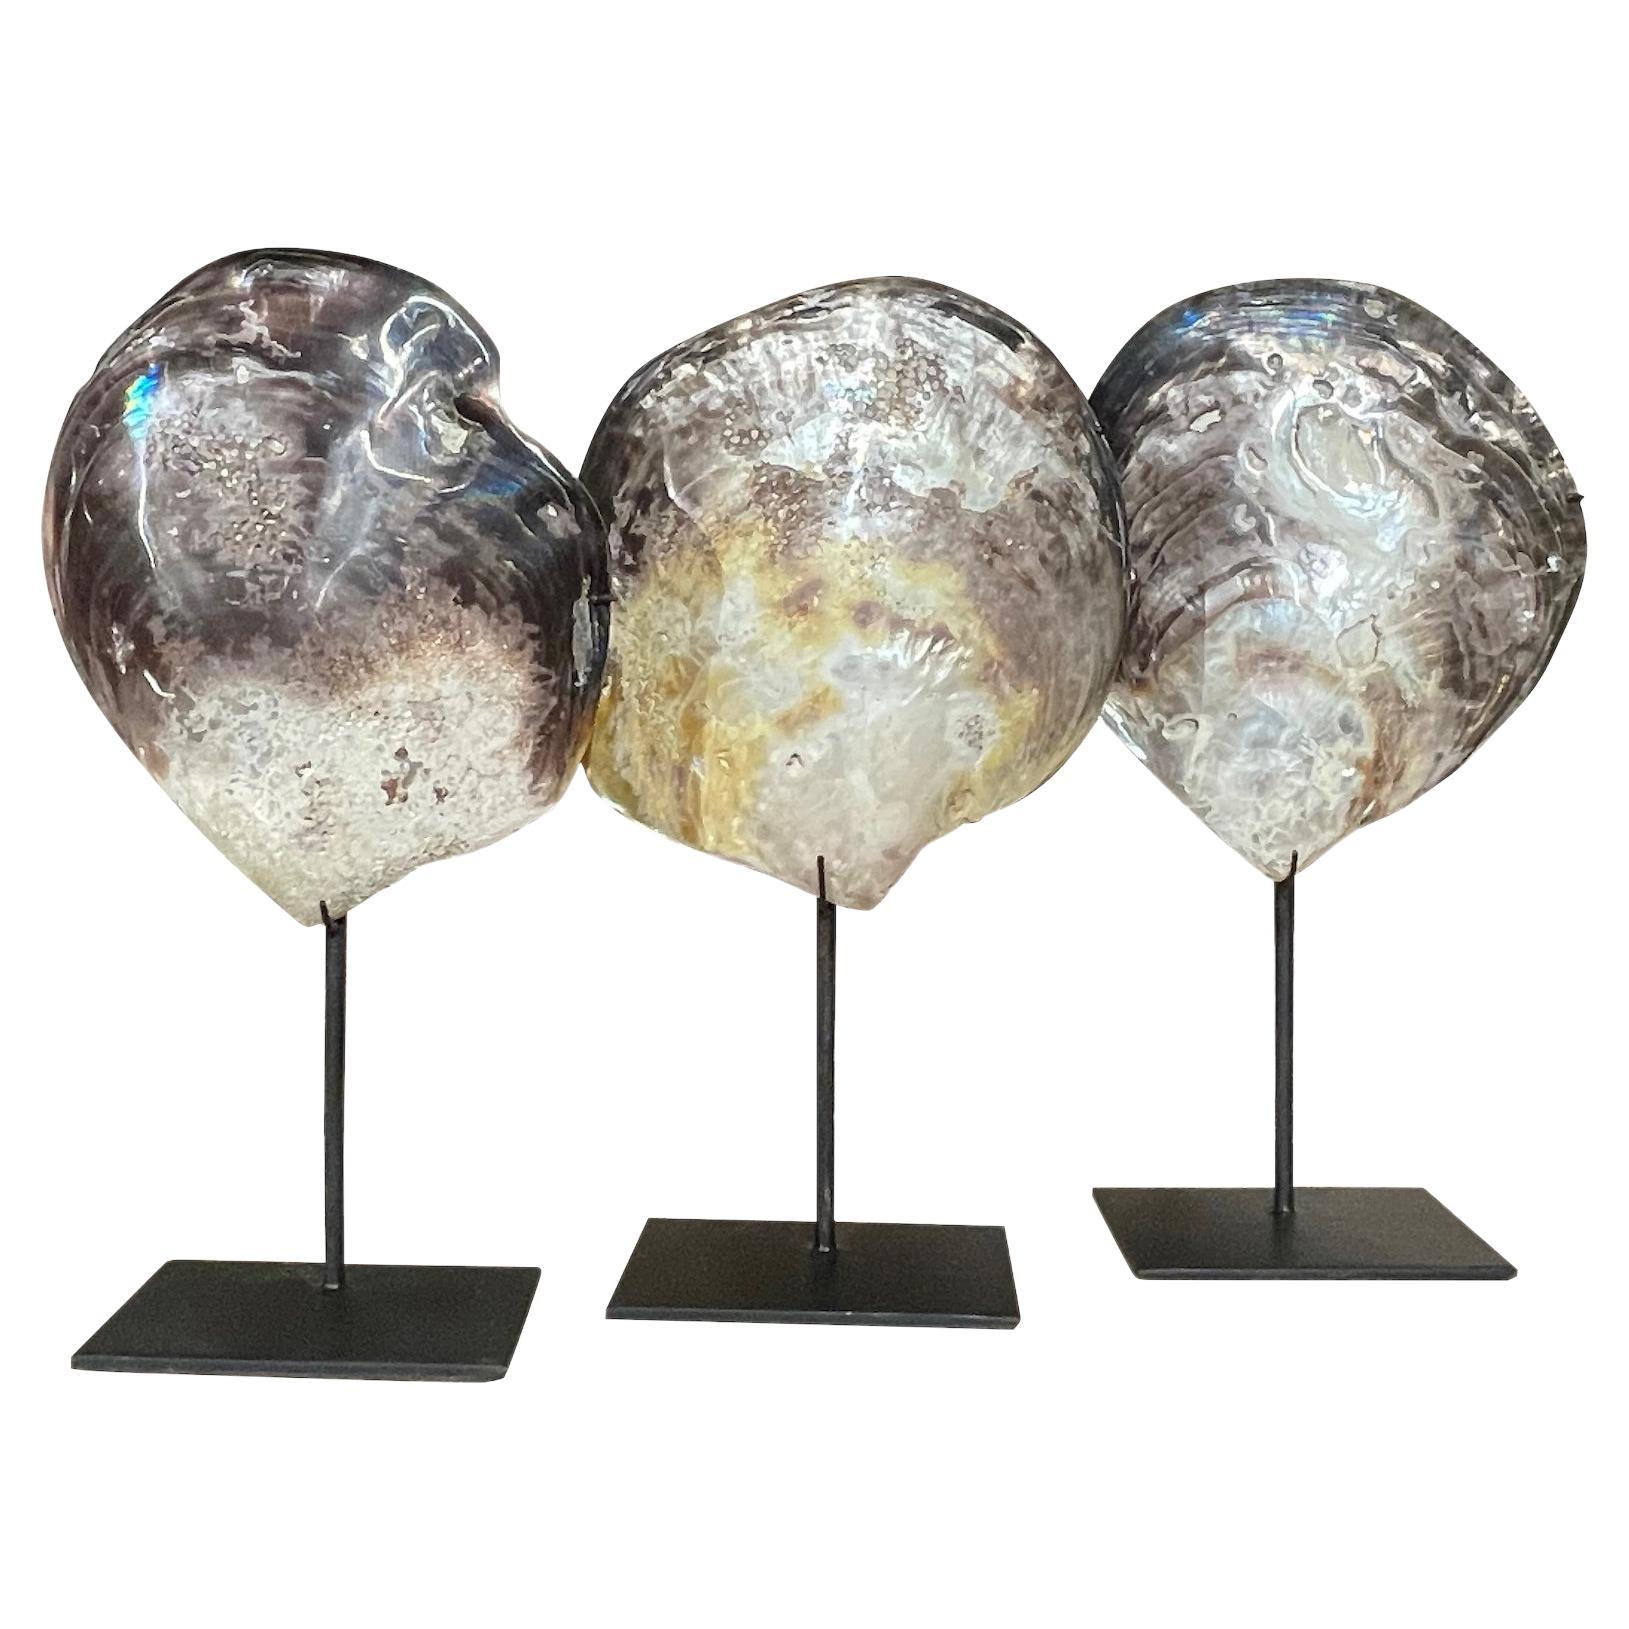 Set Of Three Mollusk Shells On Stands Sculptures, Indonesian, Contemporary For Sale